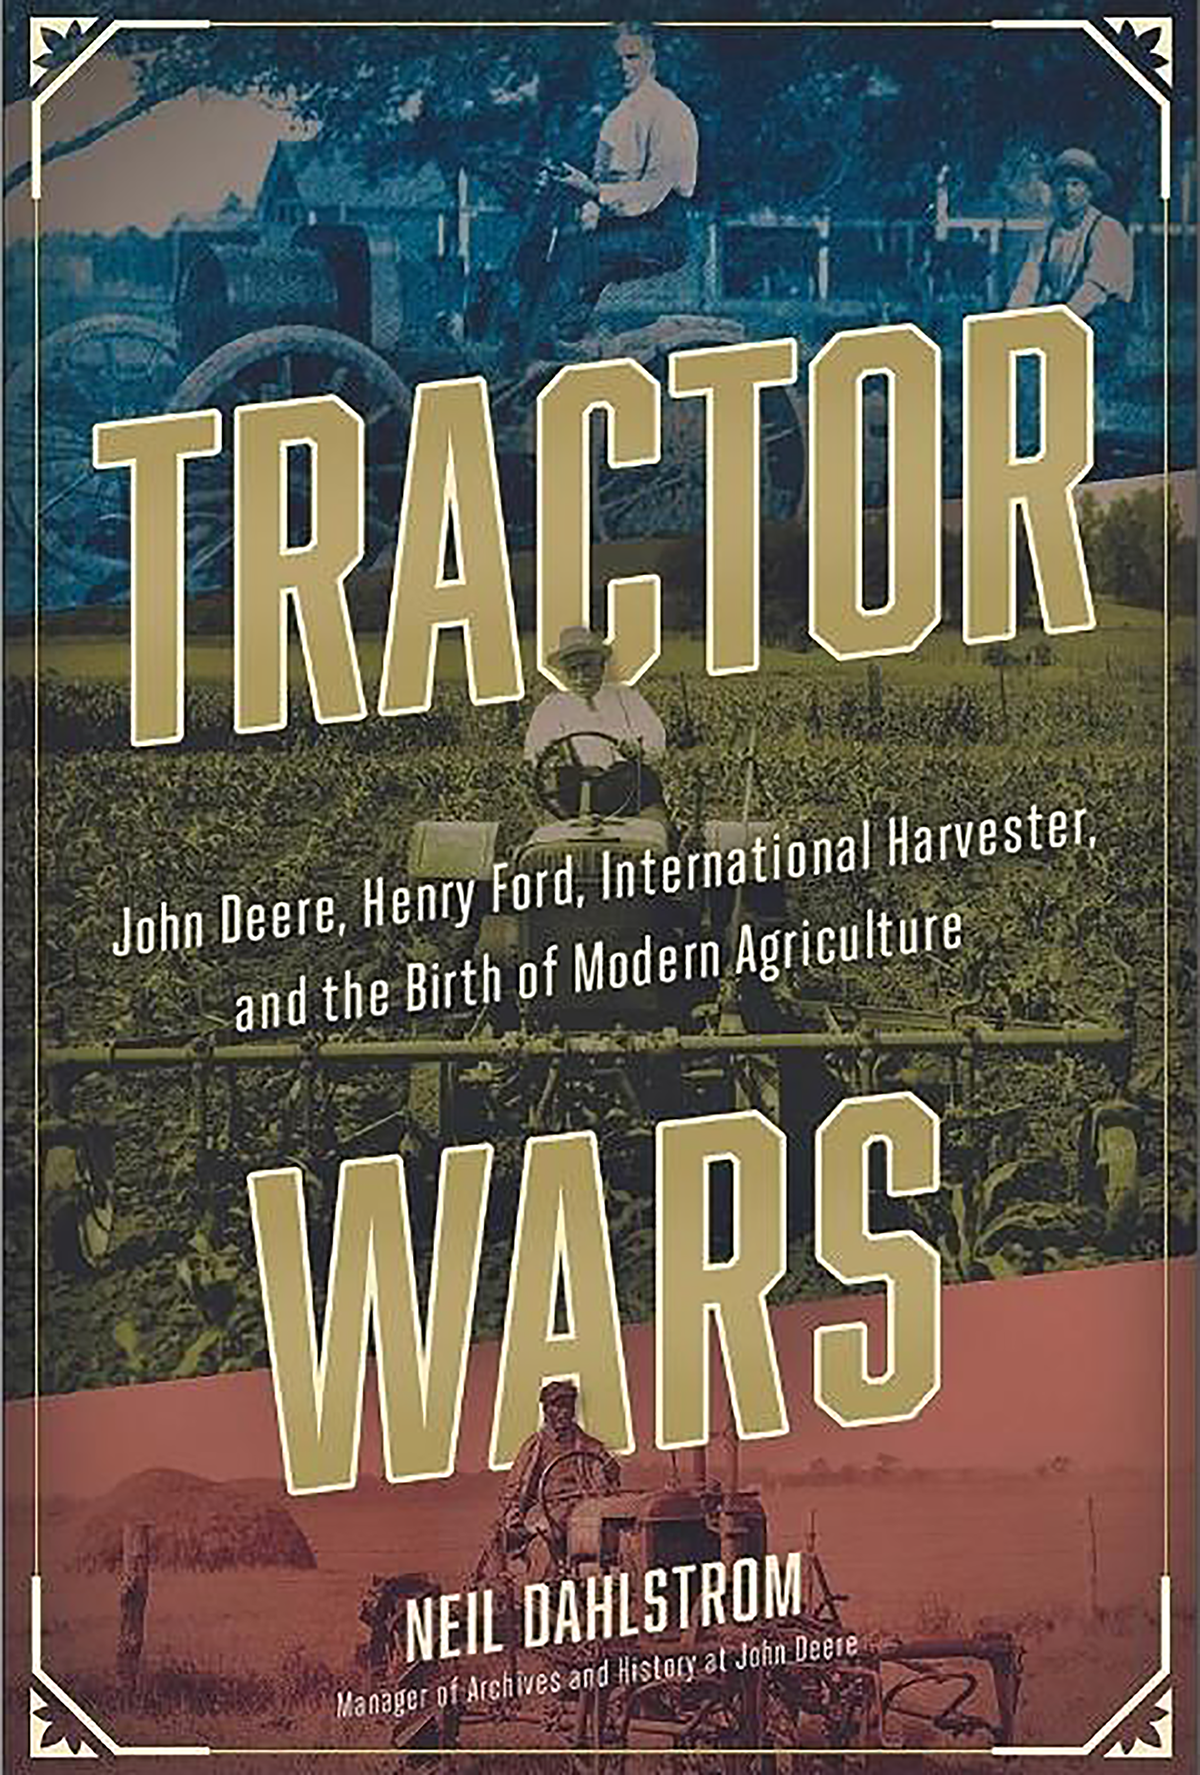 TRACTOR WARS: JOHN DEERE, HENRY FORD, INTERNATIONAL HARVESTER, AND THE BIRTH OF MODERN AGRICULTURE